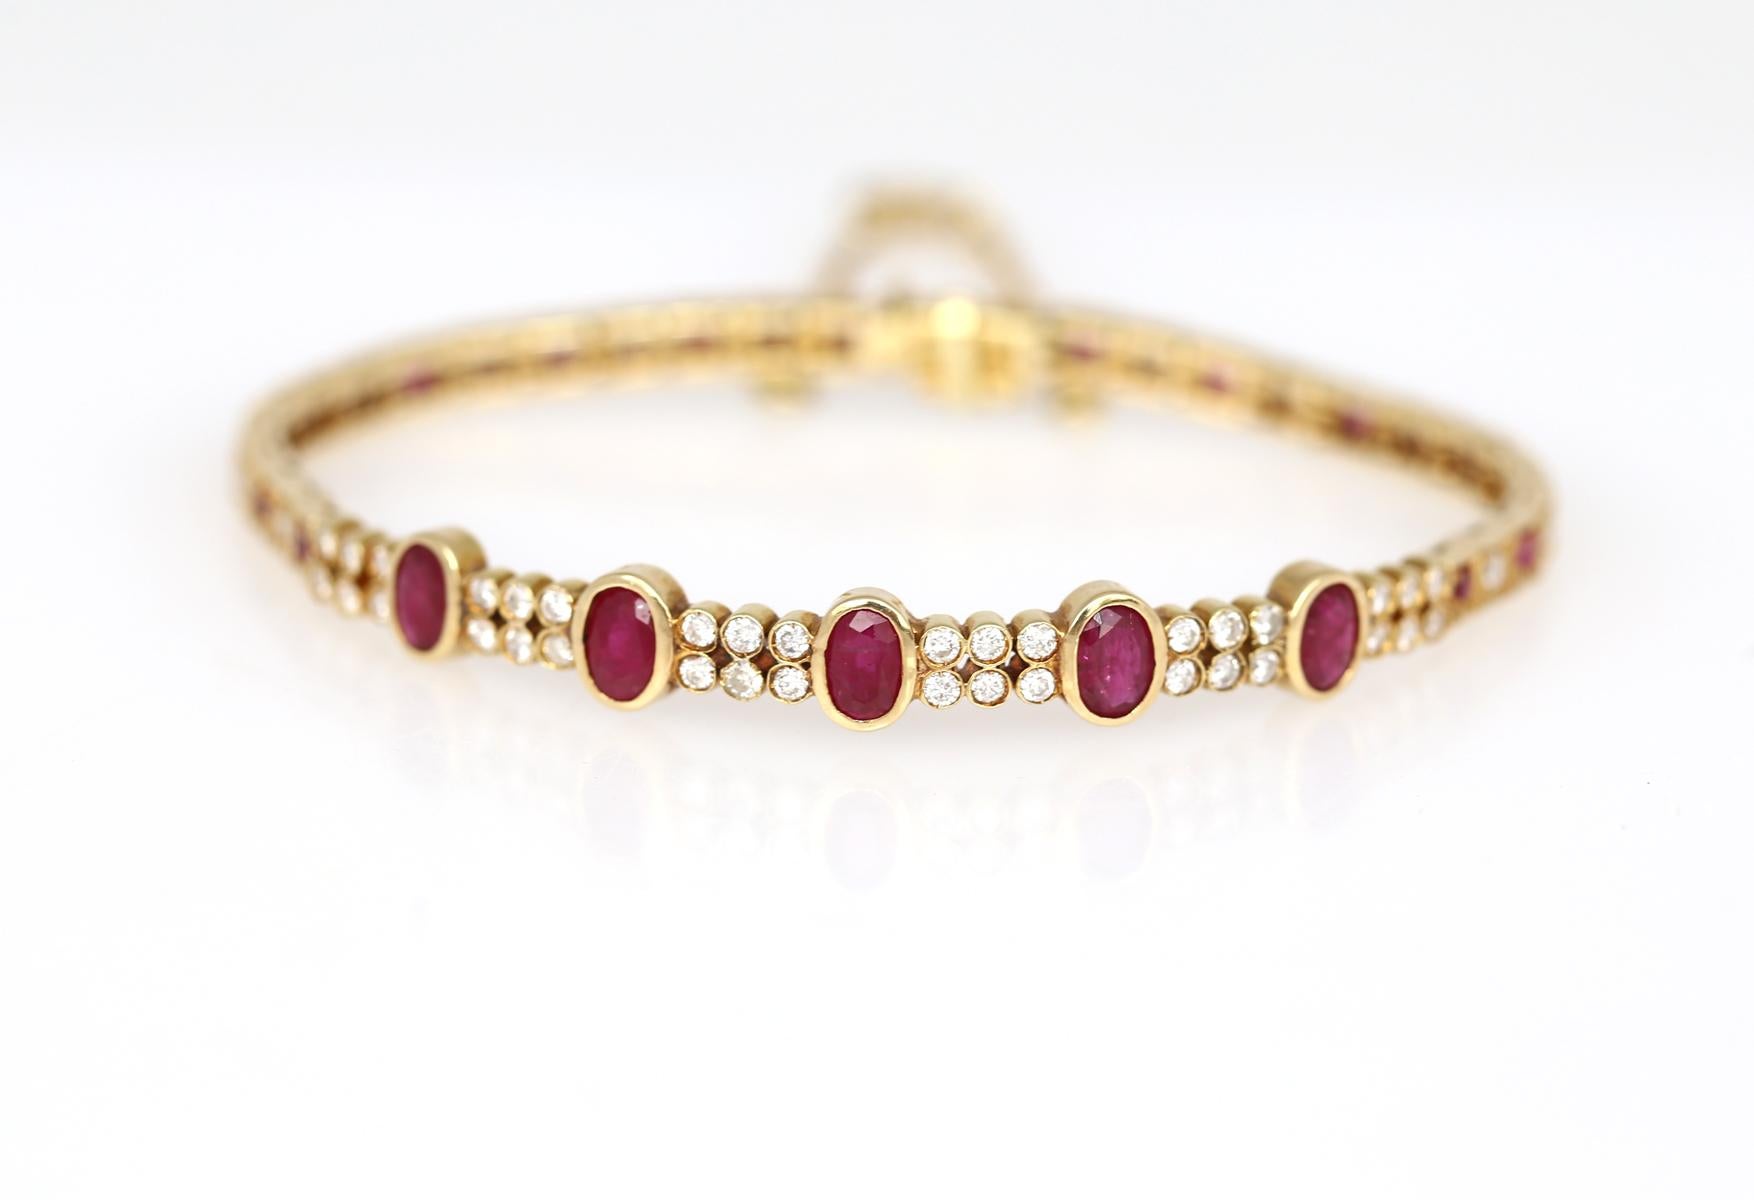 Modern Yellow Gold Bracelet with five fine oval-shaped Rubies and round-cut Diamonds. The Yellow Gold is a fine contrast to the fine Red Rubies on the face side. The construction of the bracelet is really flexible and tender. It sits perfectly on